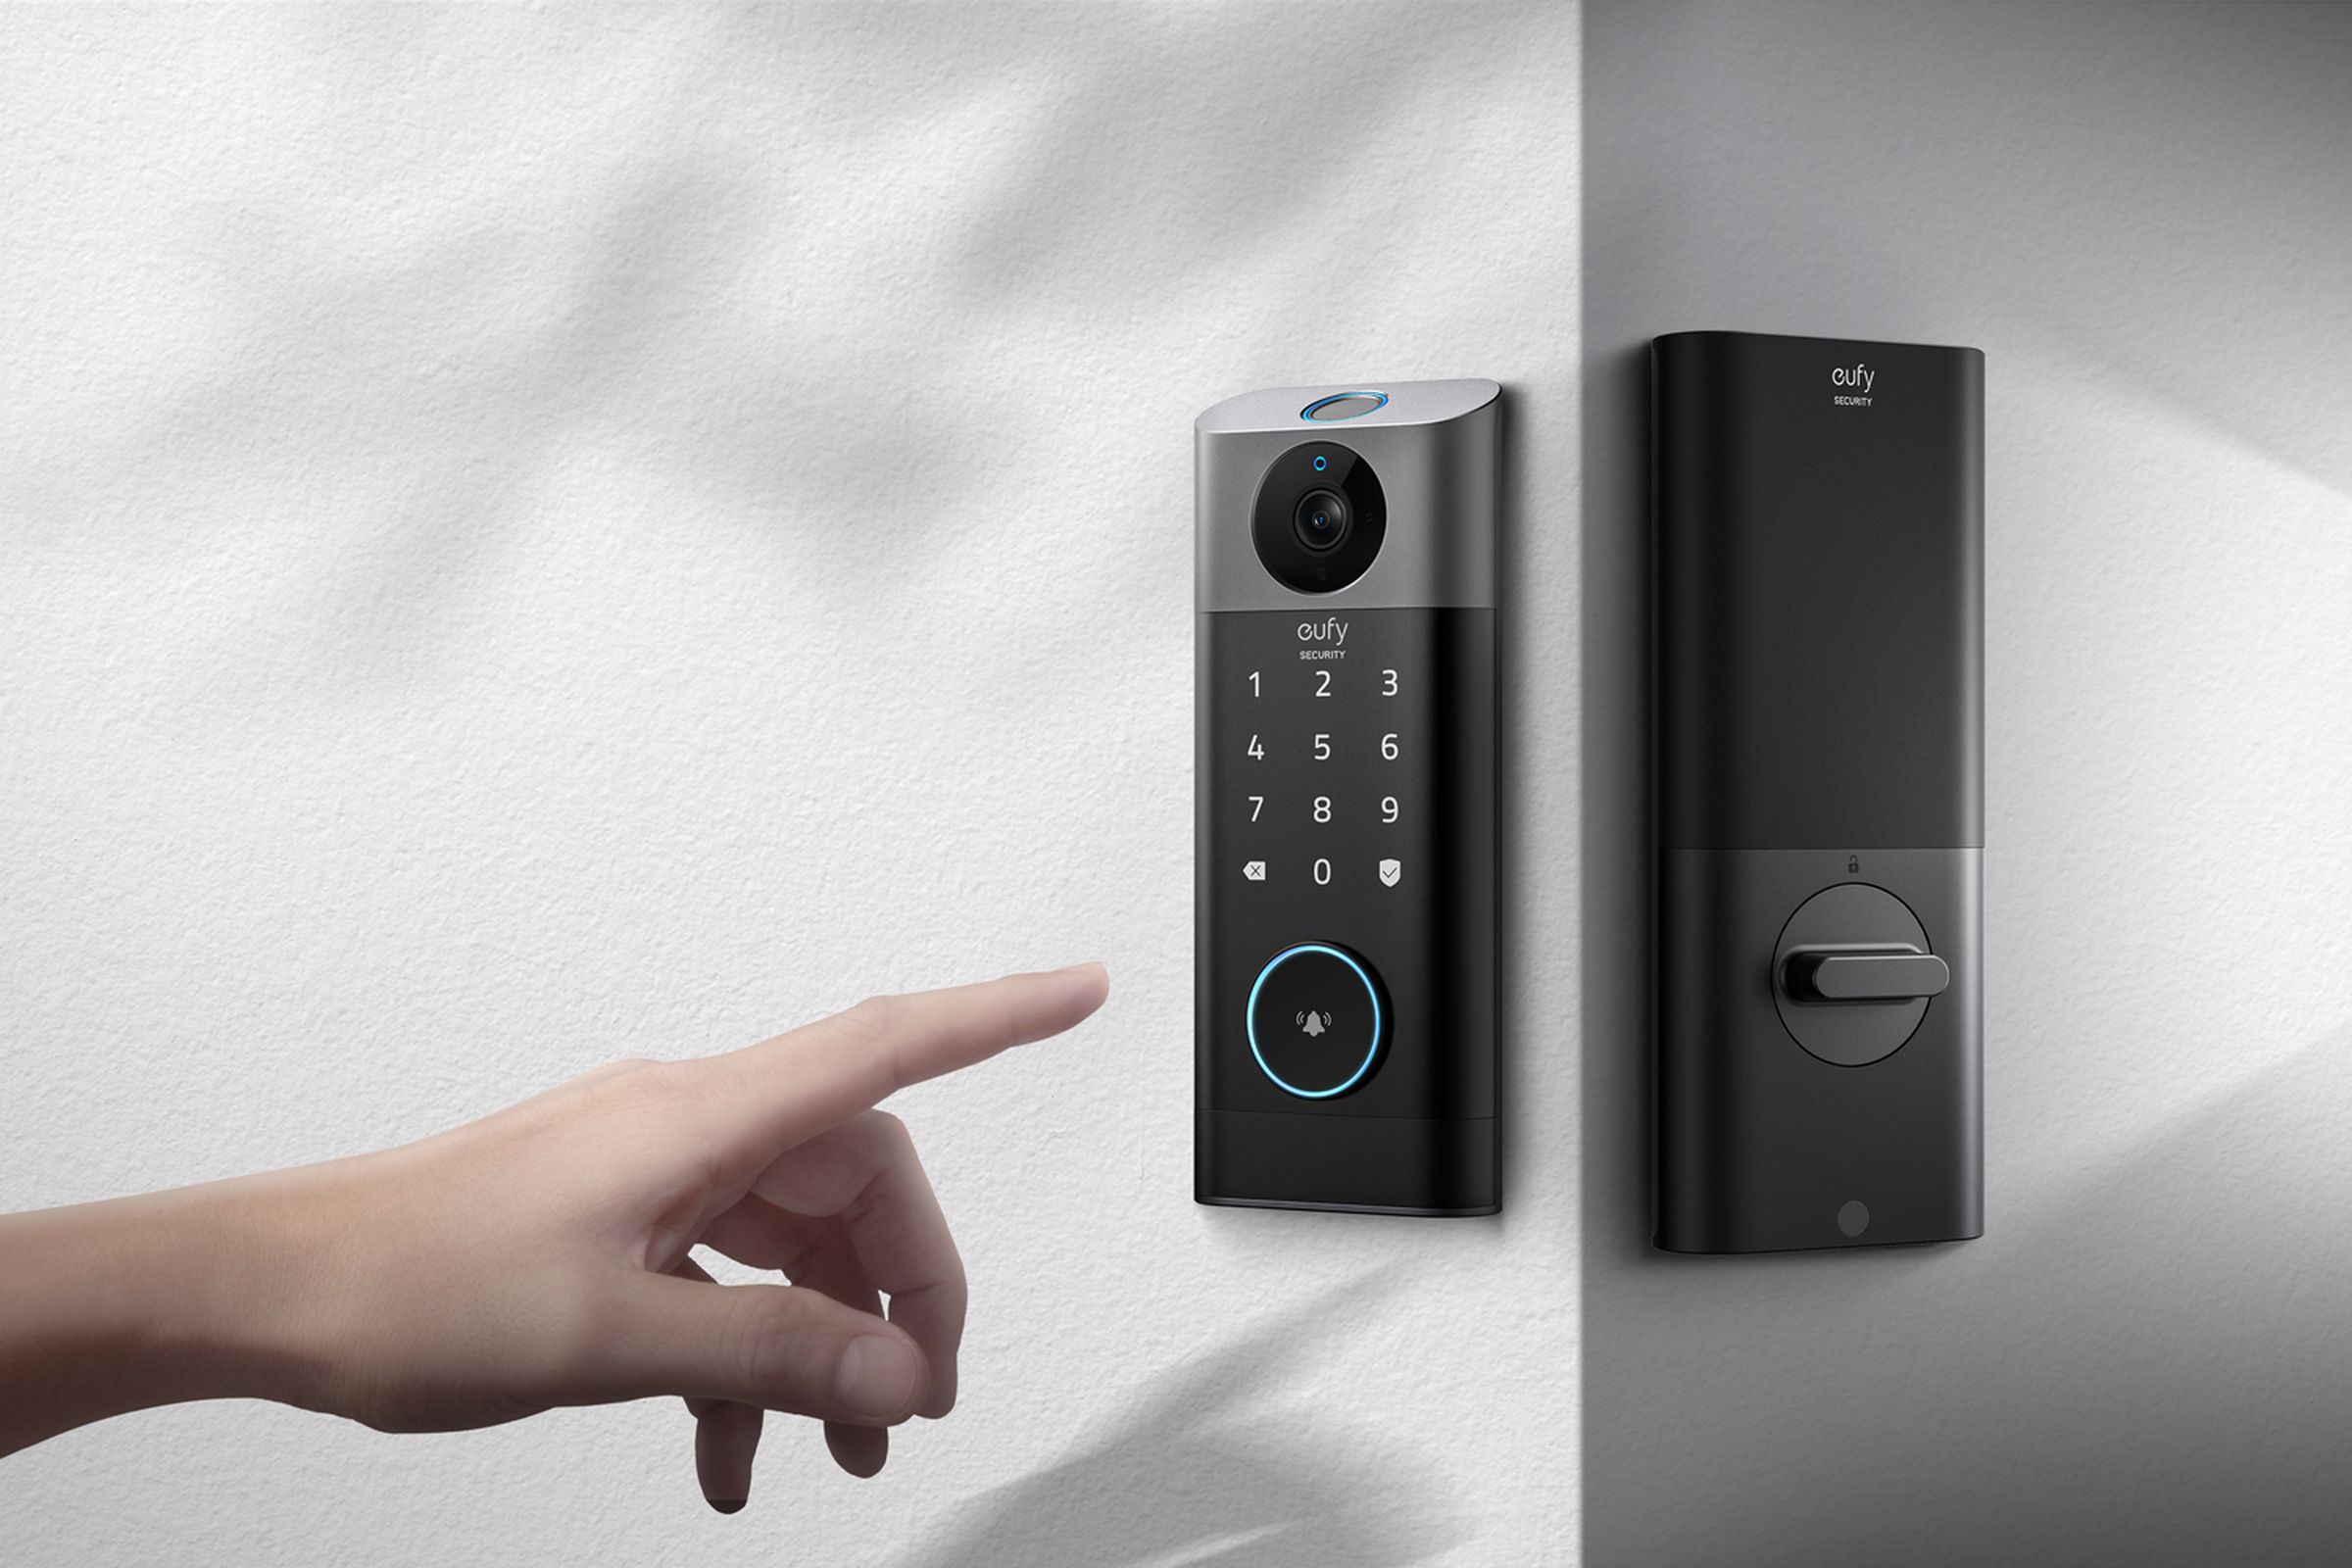 Eufy’s new Video Smart Lock could solve two smart home security problems in one.